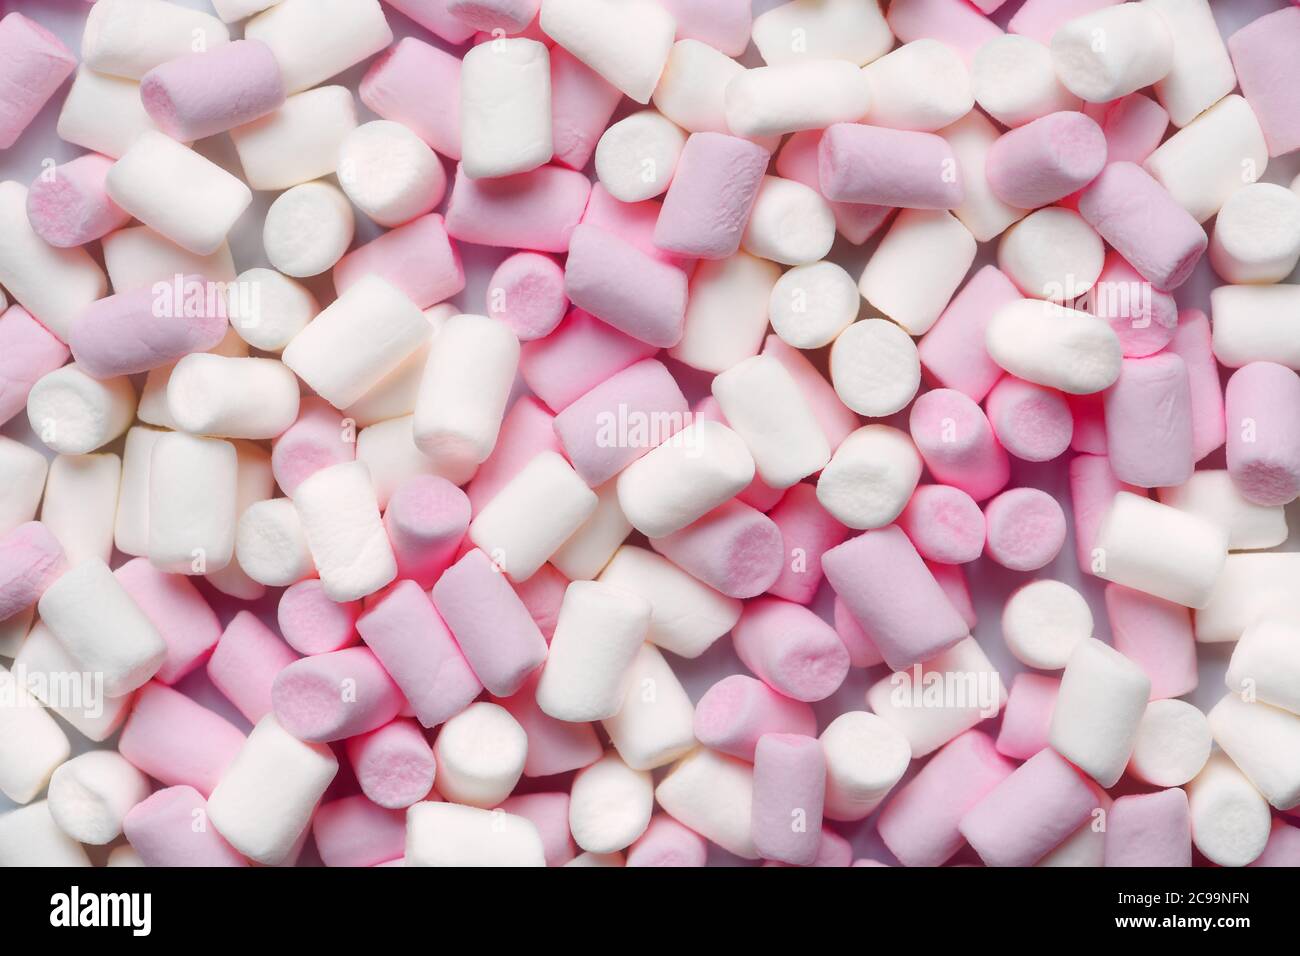 Pink and white marshmallows in close up. Soft candy background. Stock Photo